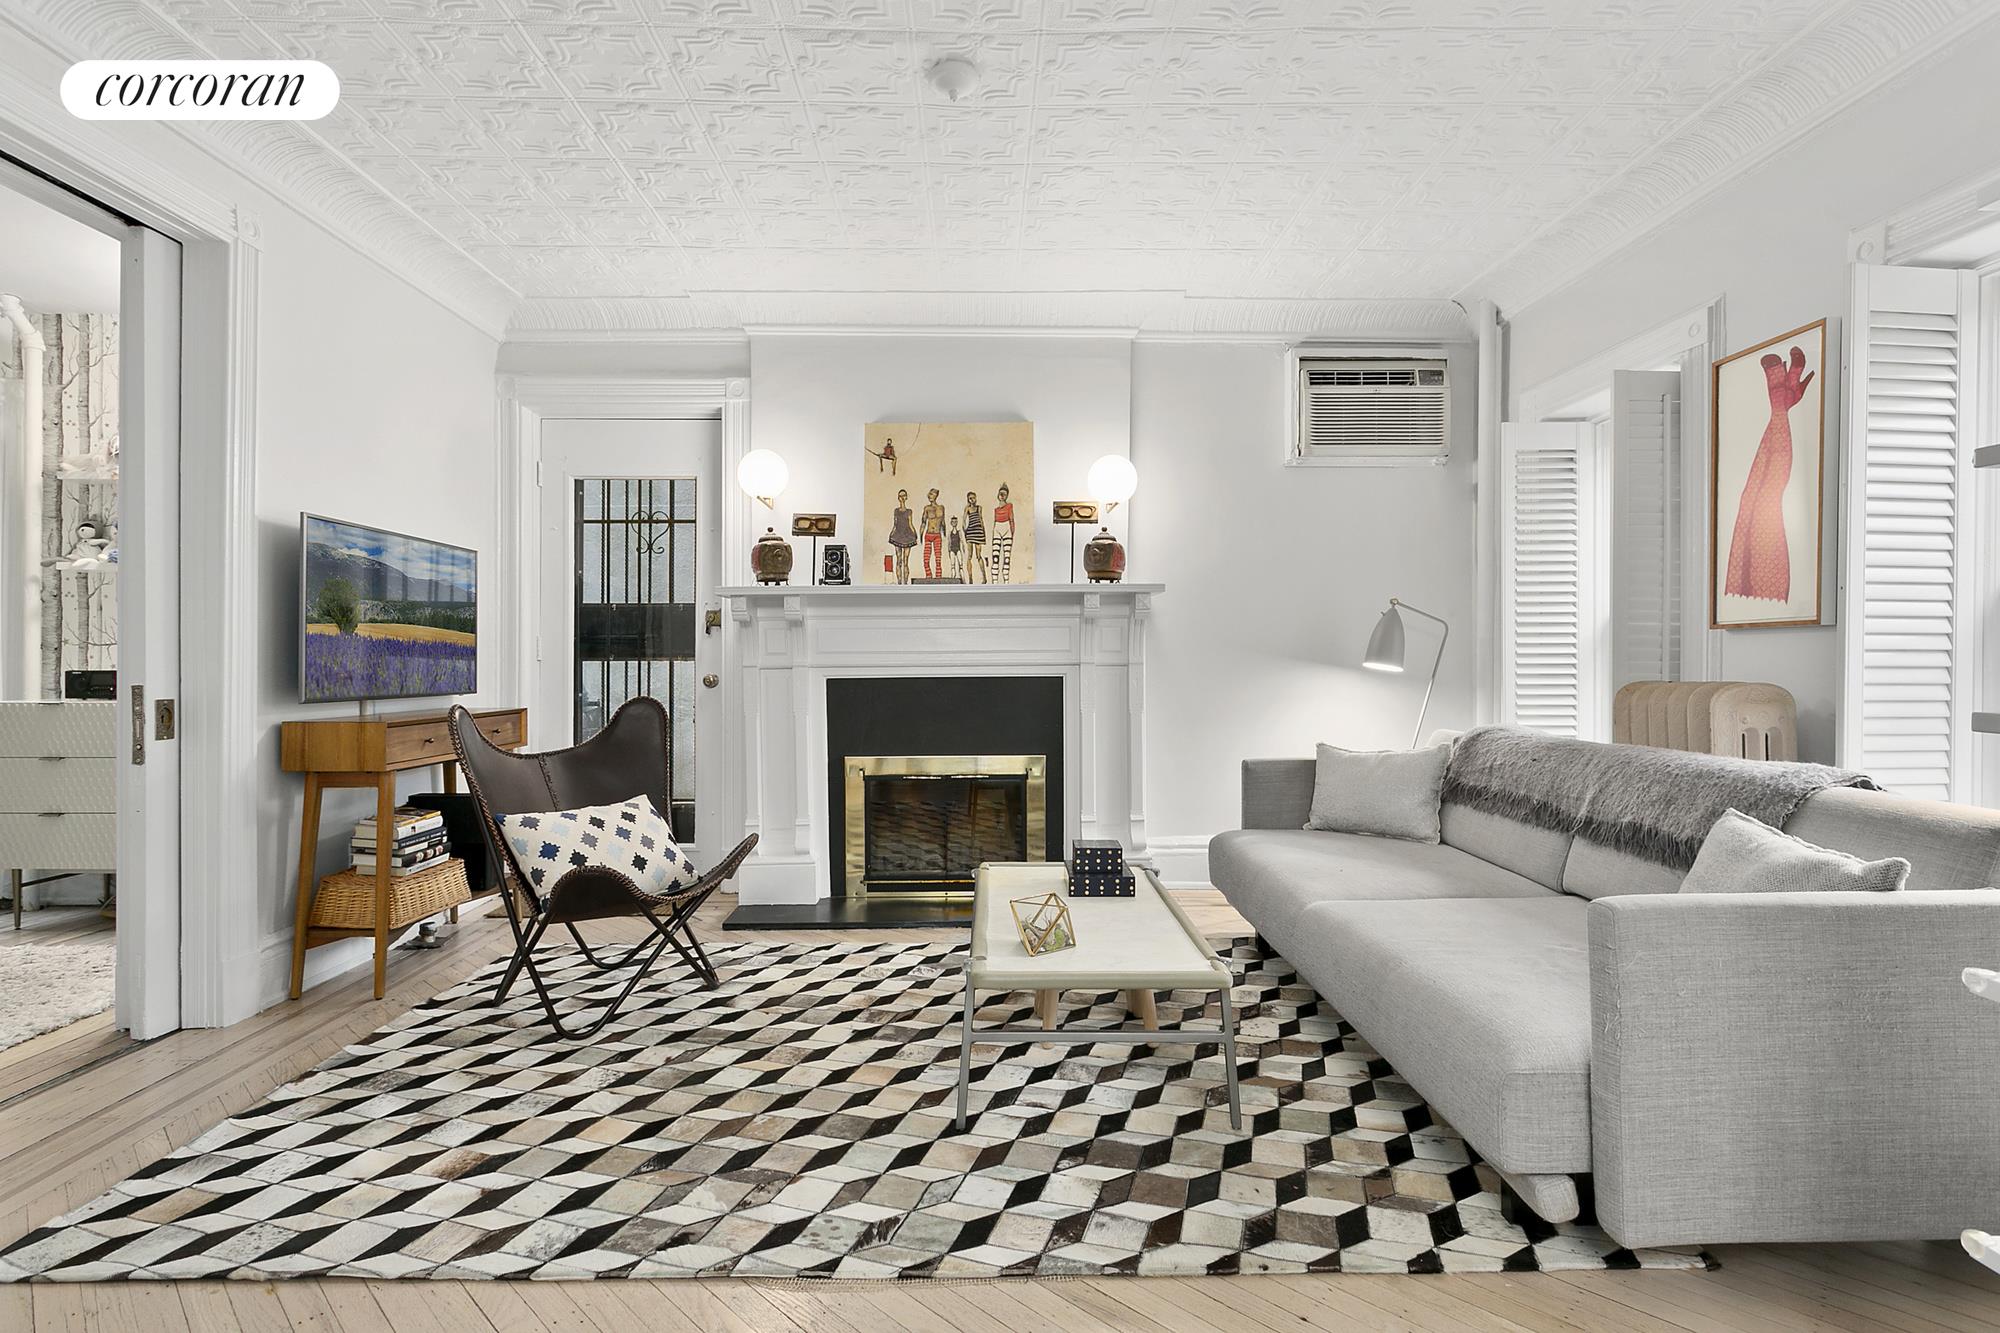 Apartment in Jay-Z's NYC 'stash spot' lists for $1.4M